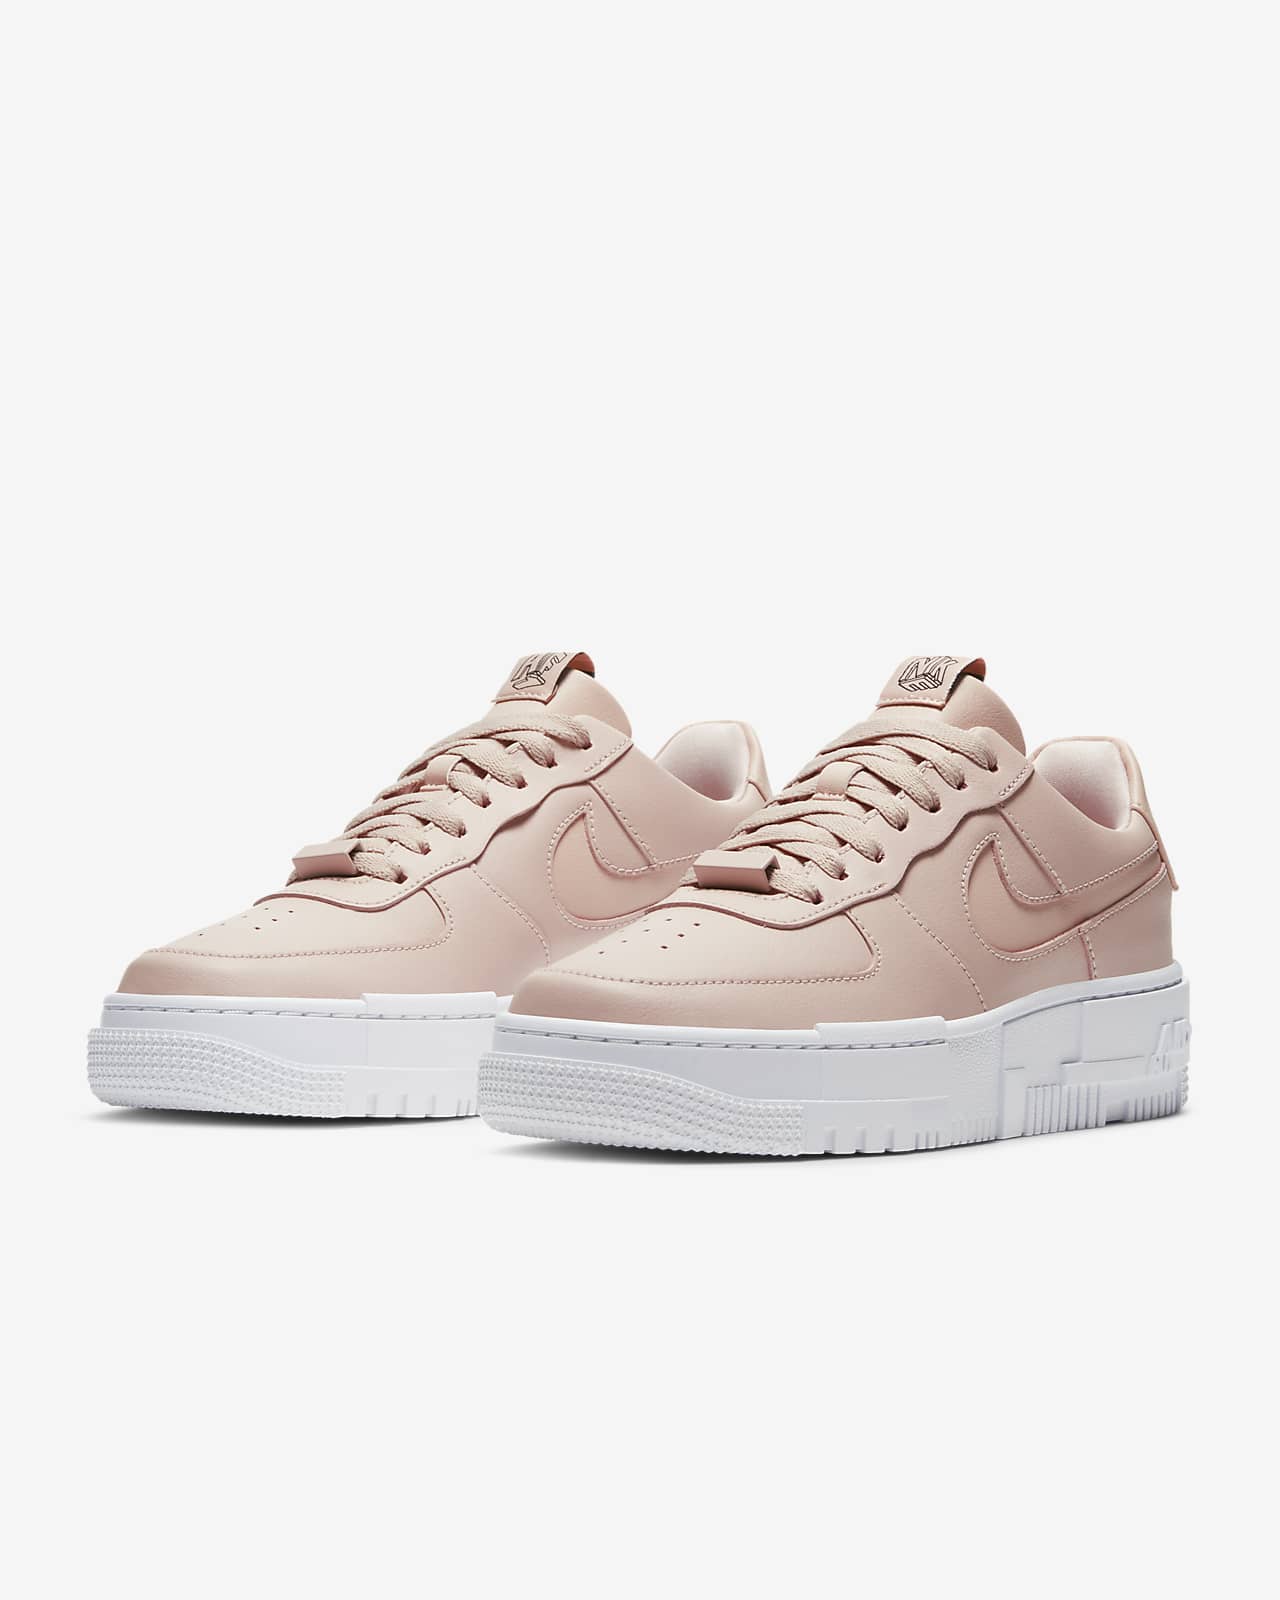 Chaussure Nike Air Force 1 Pixel pour Femme